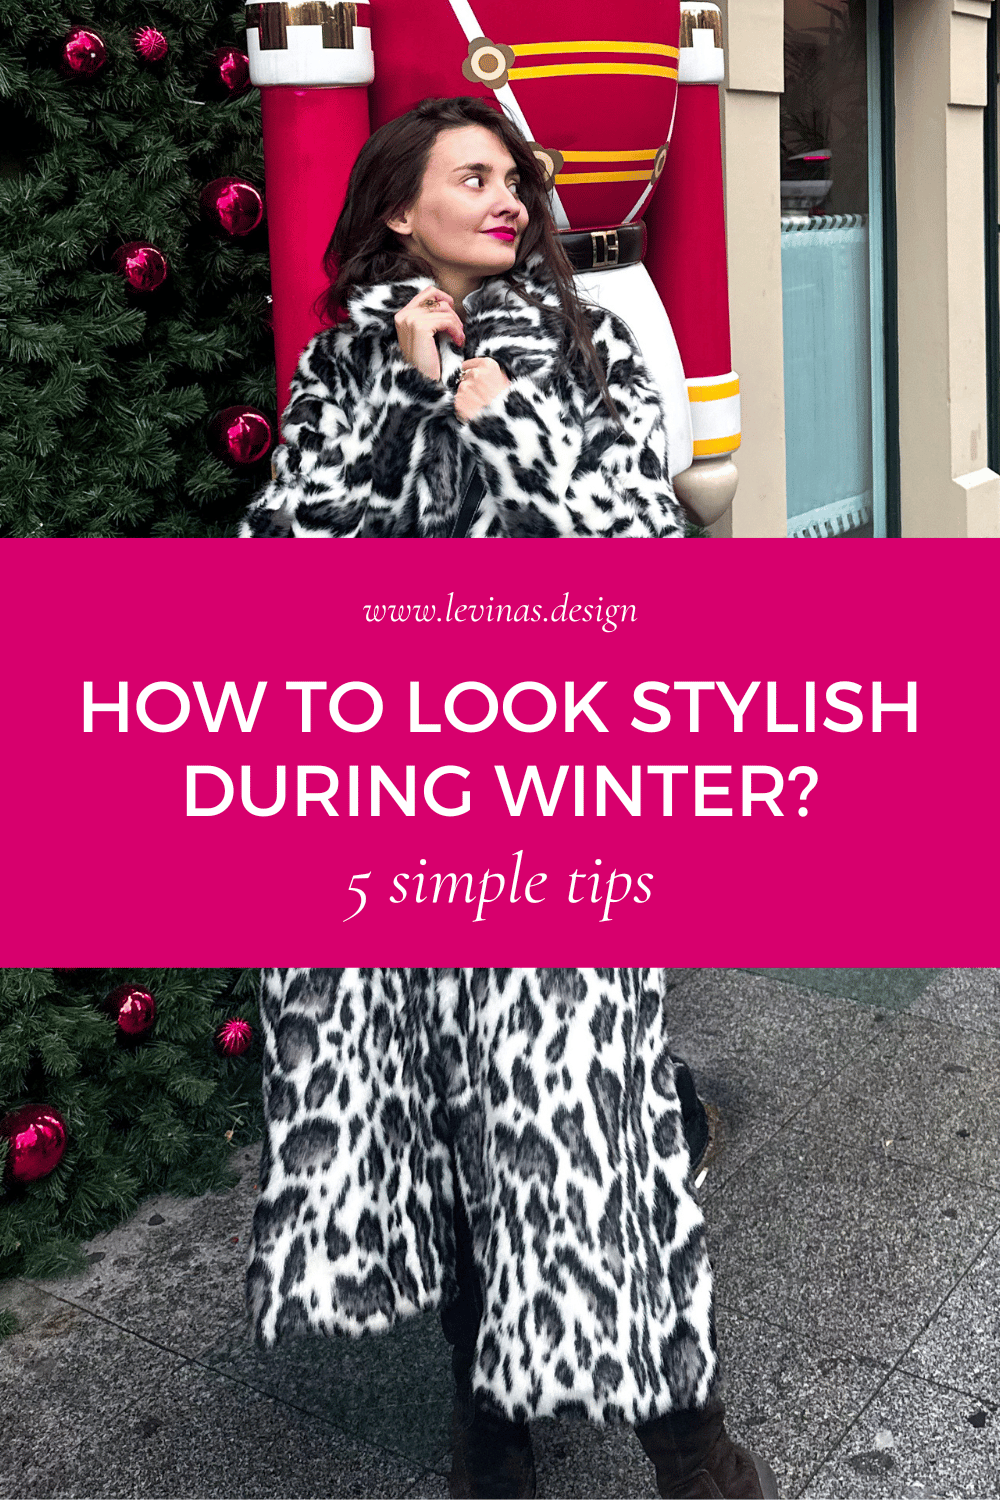 How To Stay Stylish In The Snow - Sed Bona